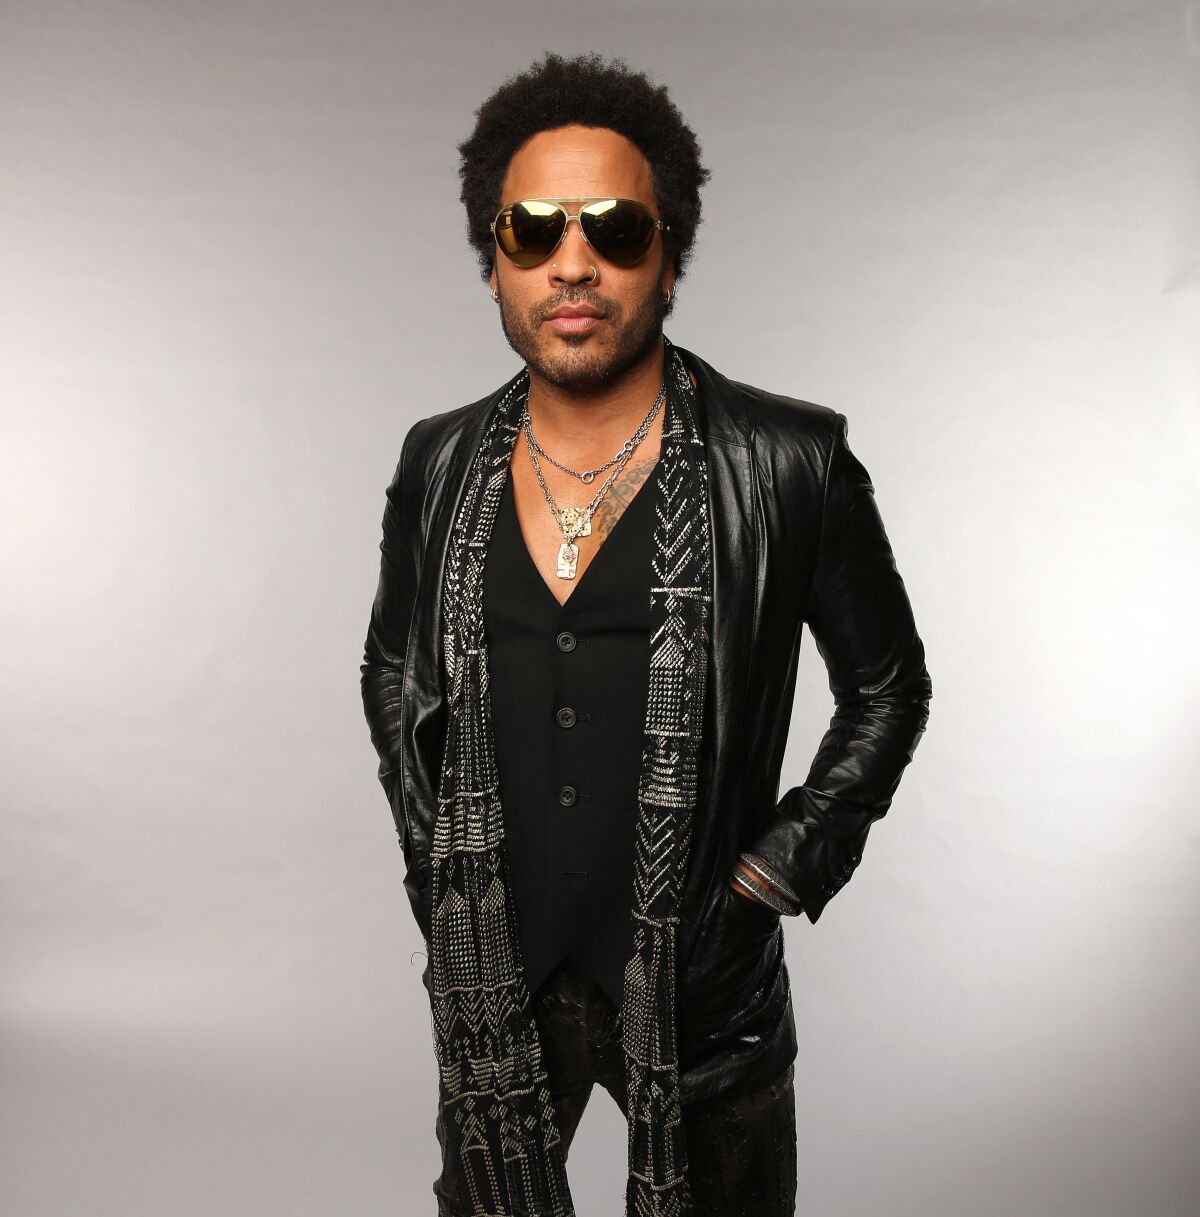 A photo of Lenny Kravitz at the Wonderwall Portrait Studio for the 2013 CMT Music Awards